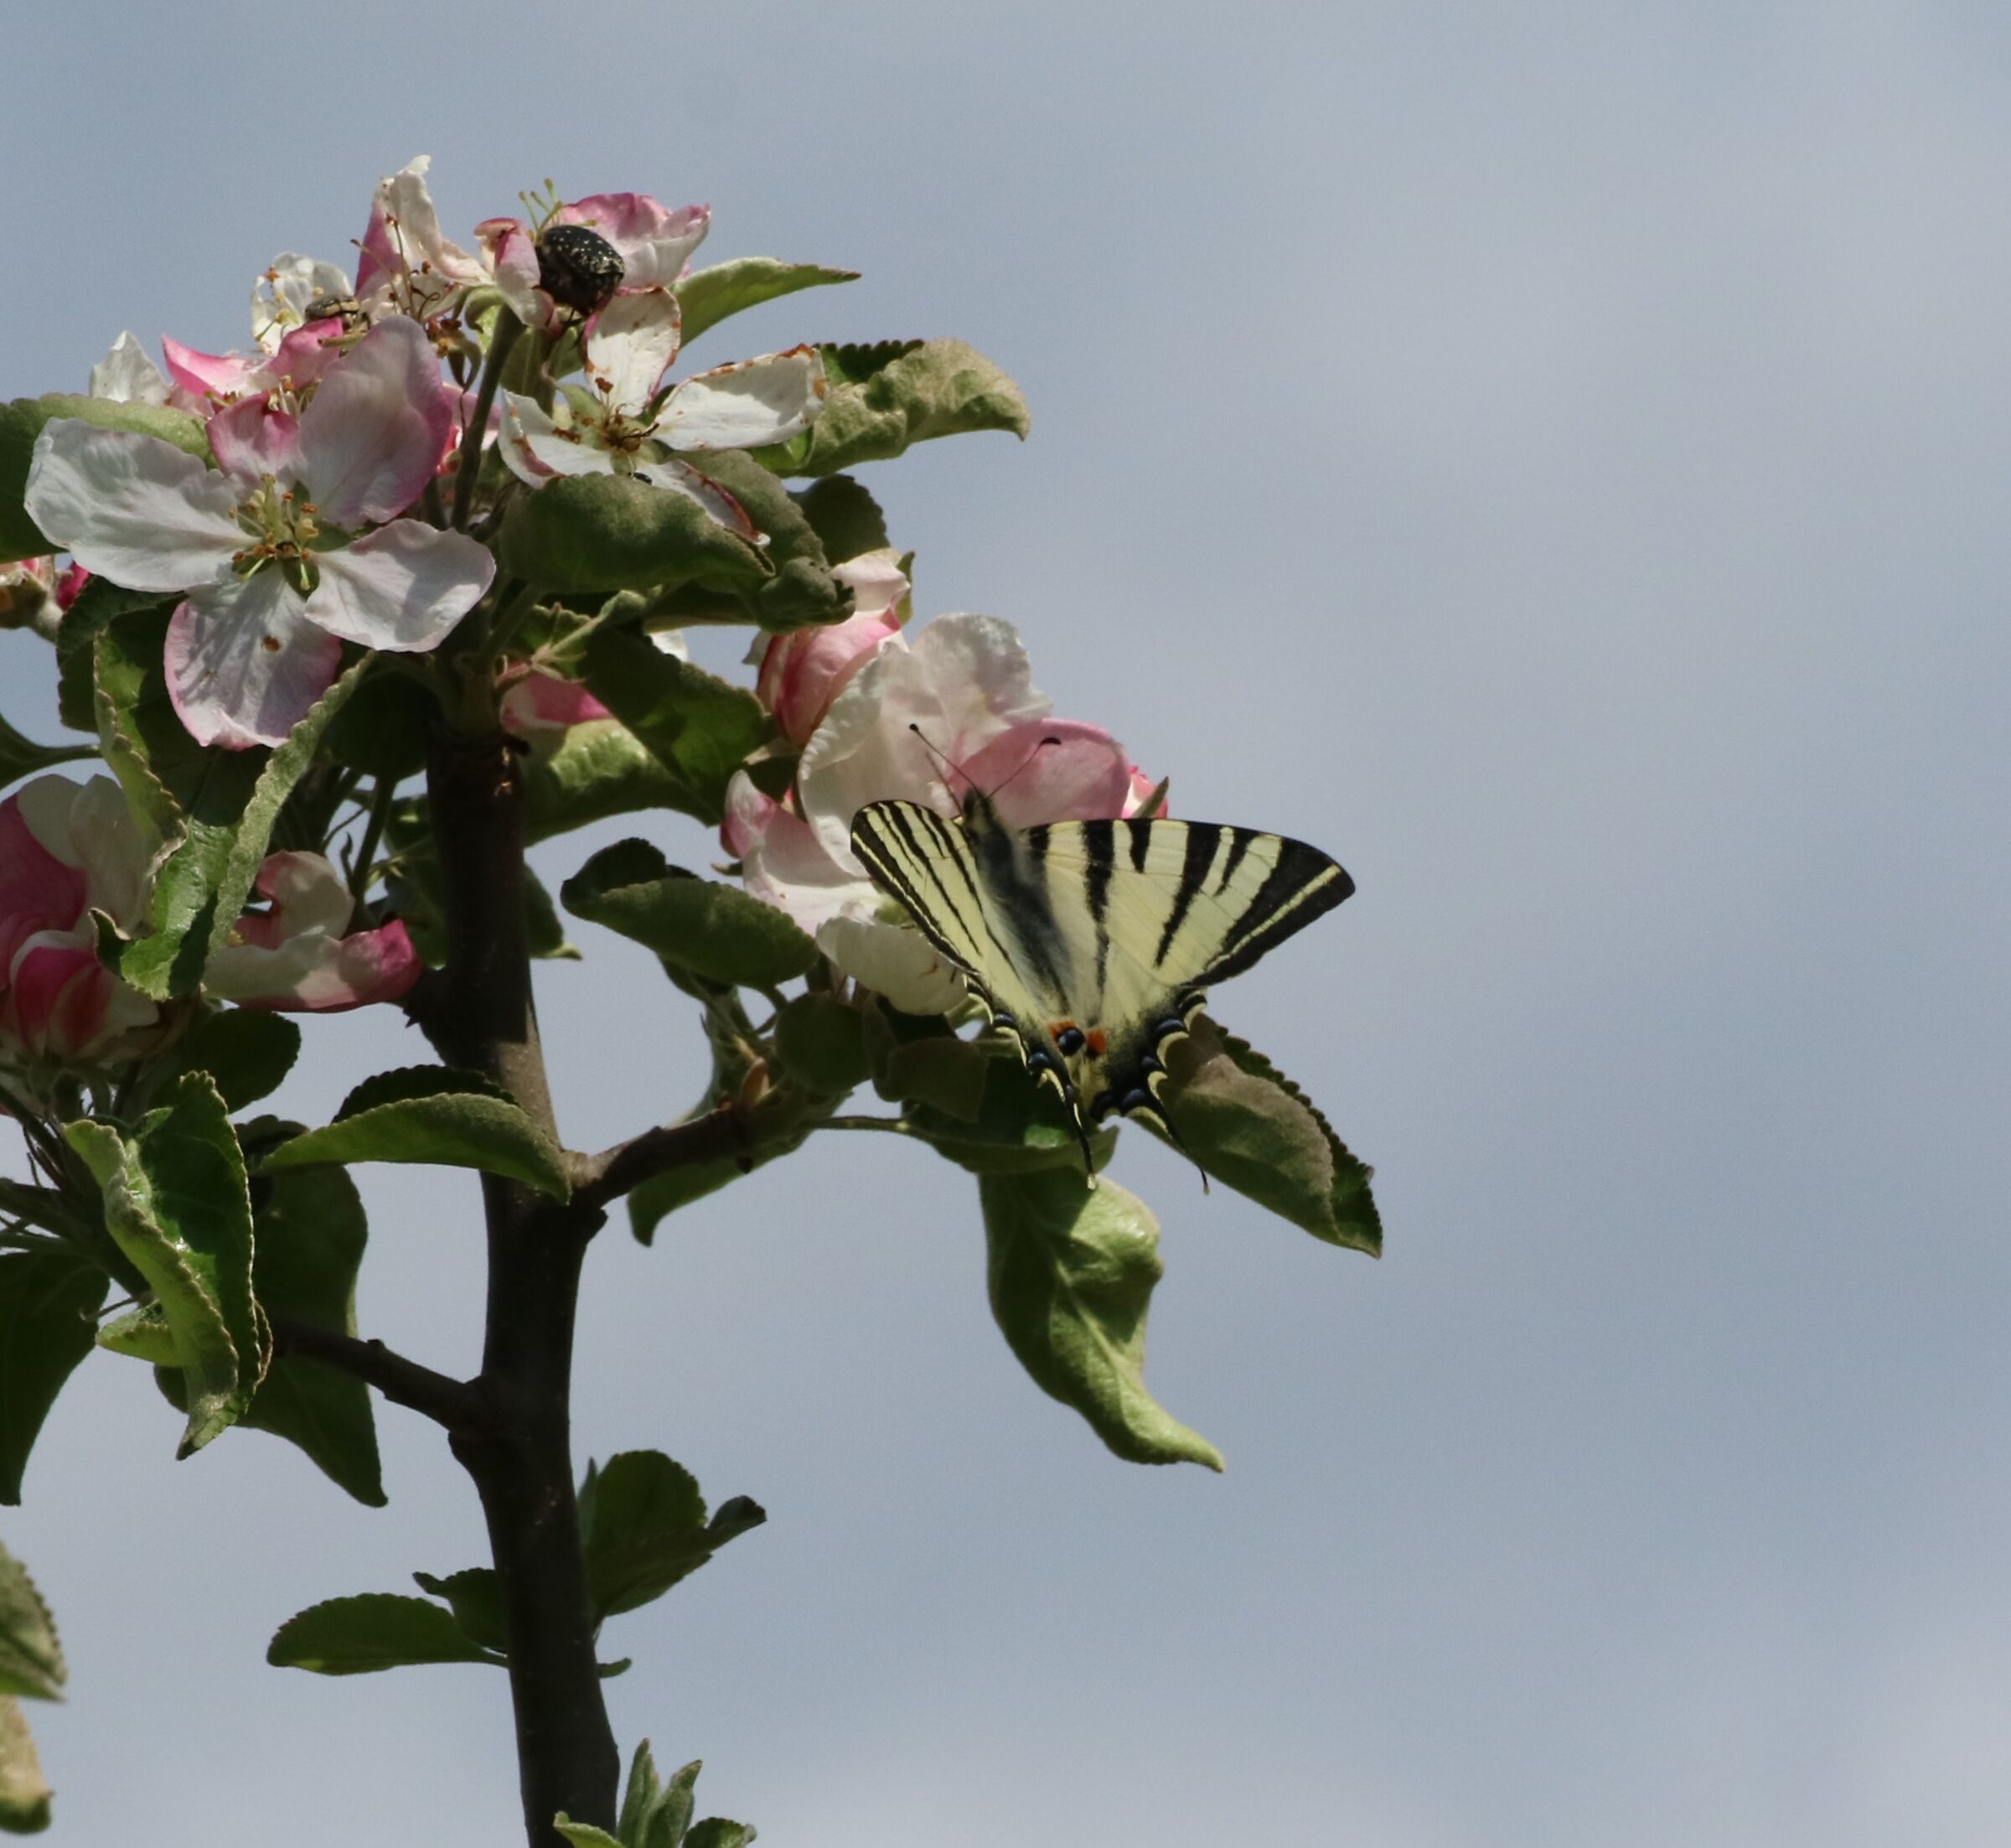 butterfly in the apple blossom...